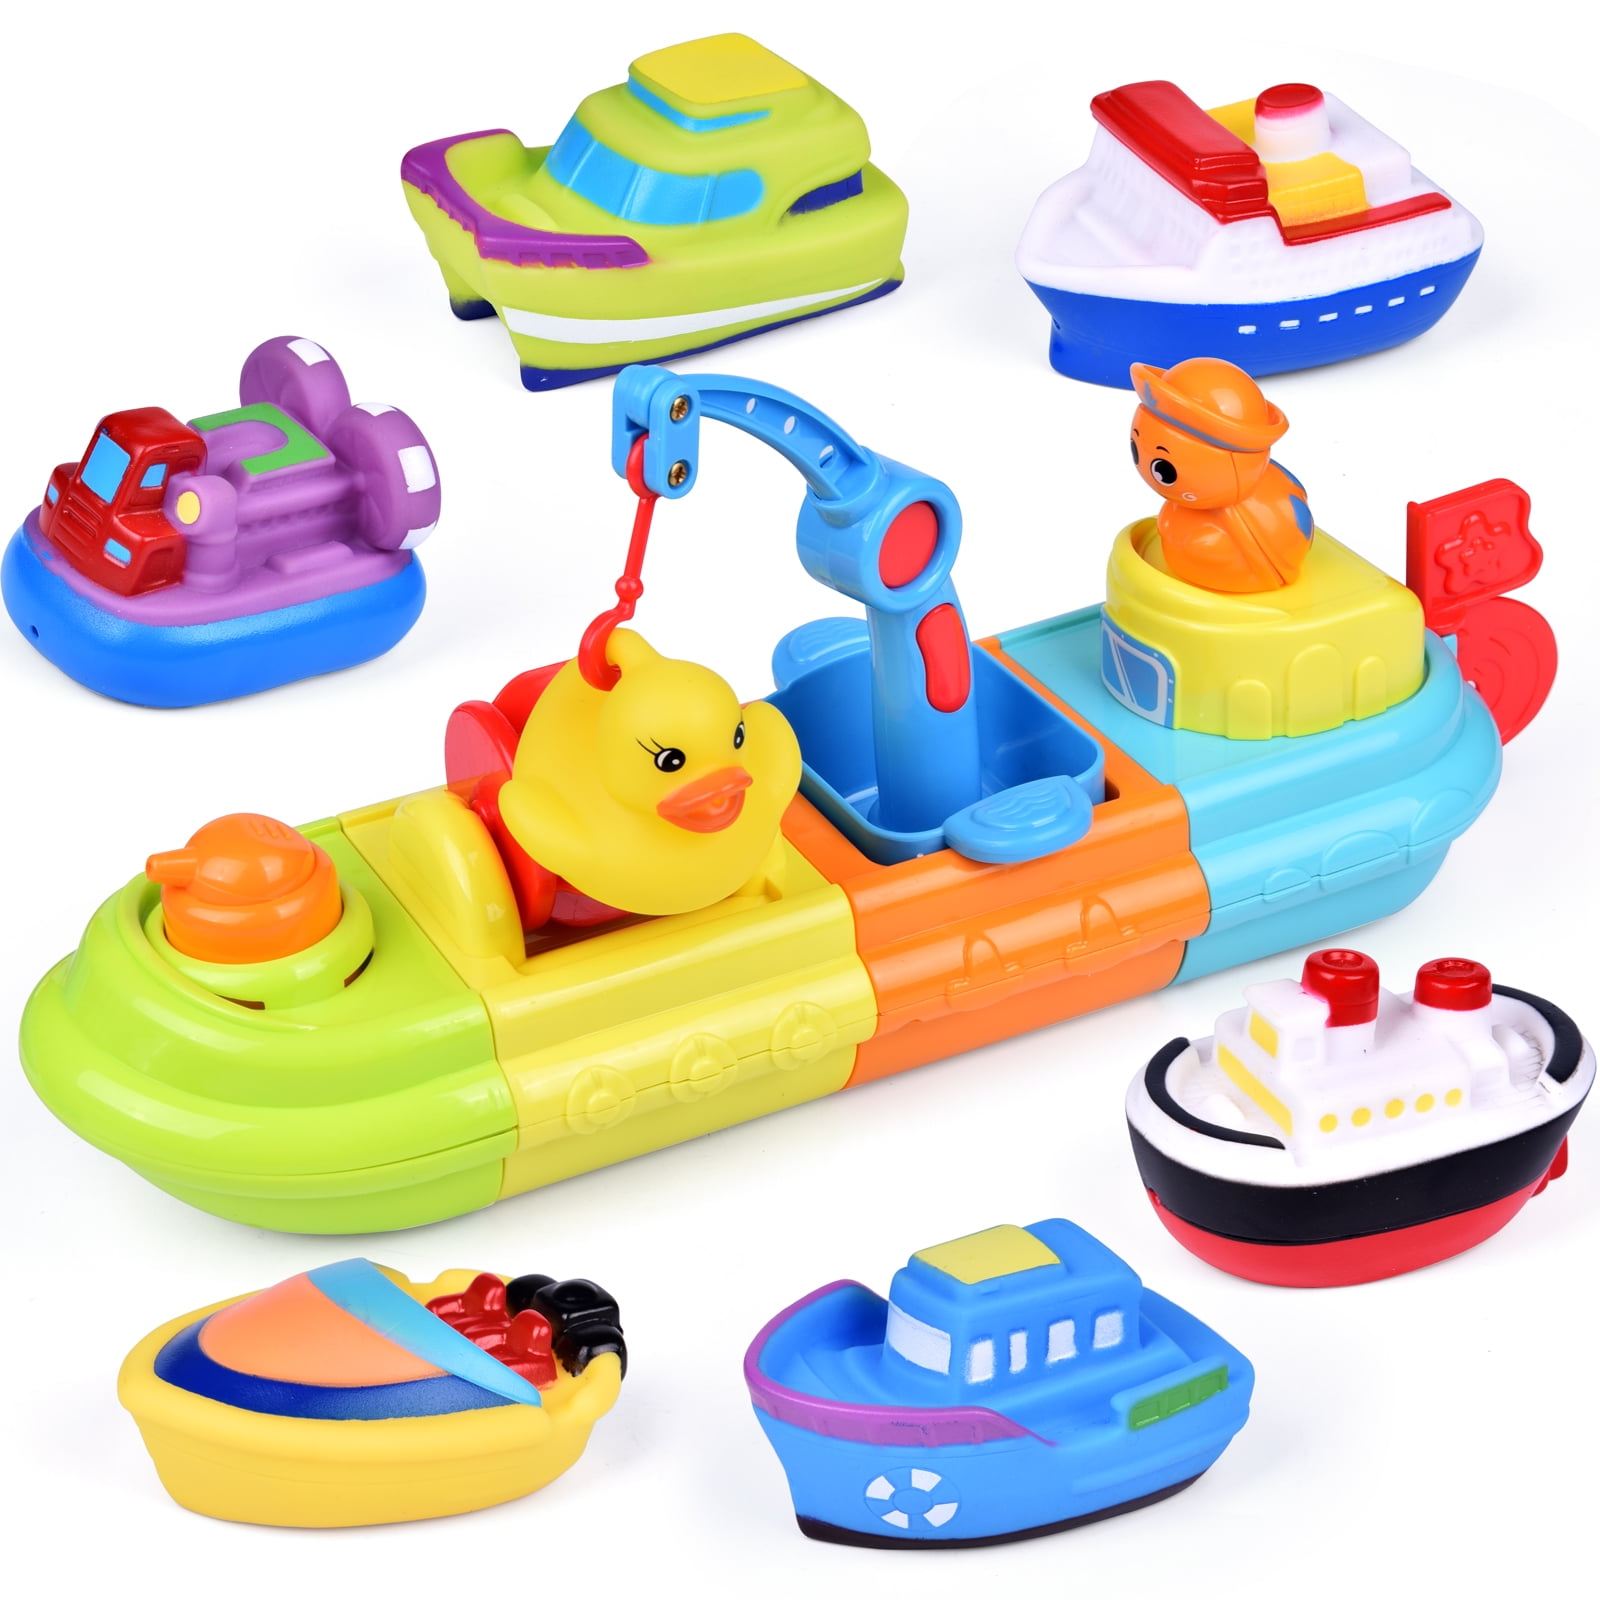 Kiddolab Bath Boat Toys for Toddlers - Pull and Go Toy Boat for Pool Playtime Floating Accessories - Bathtub Toys for 1,2,3 Years Old Babies and Kids